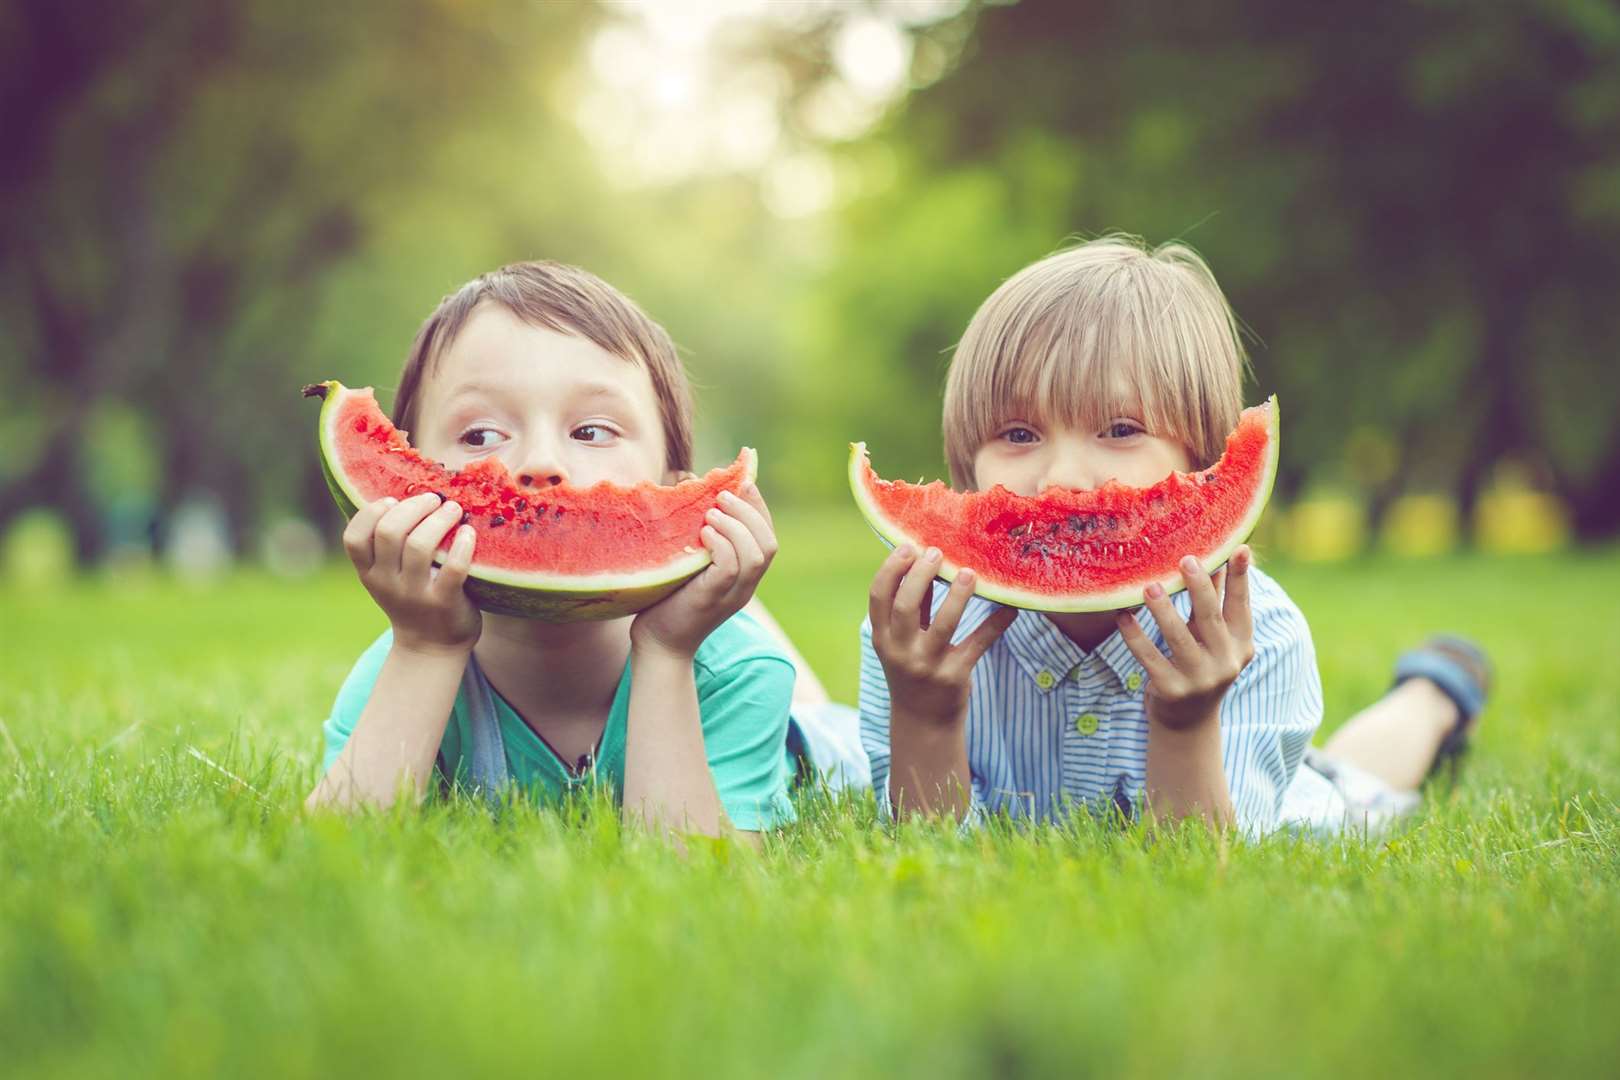 Can you encourage your children to swap some of the snacks for fruit and vegetables?